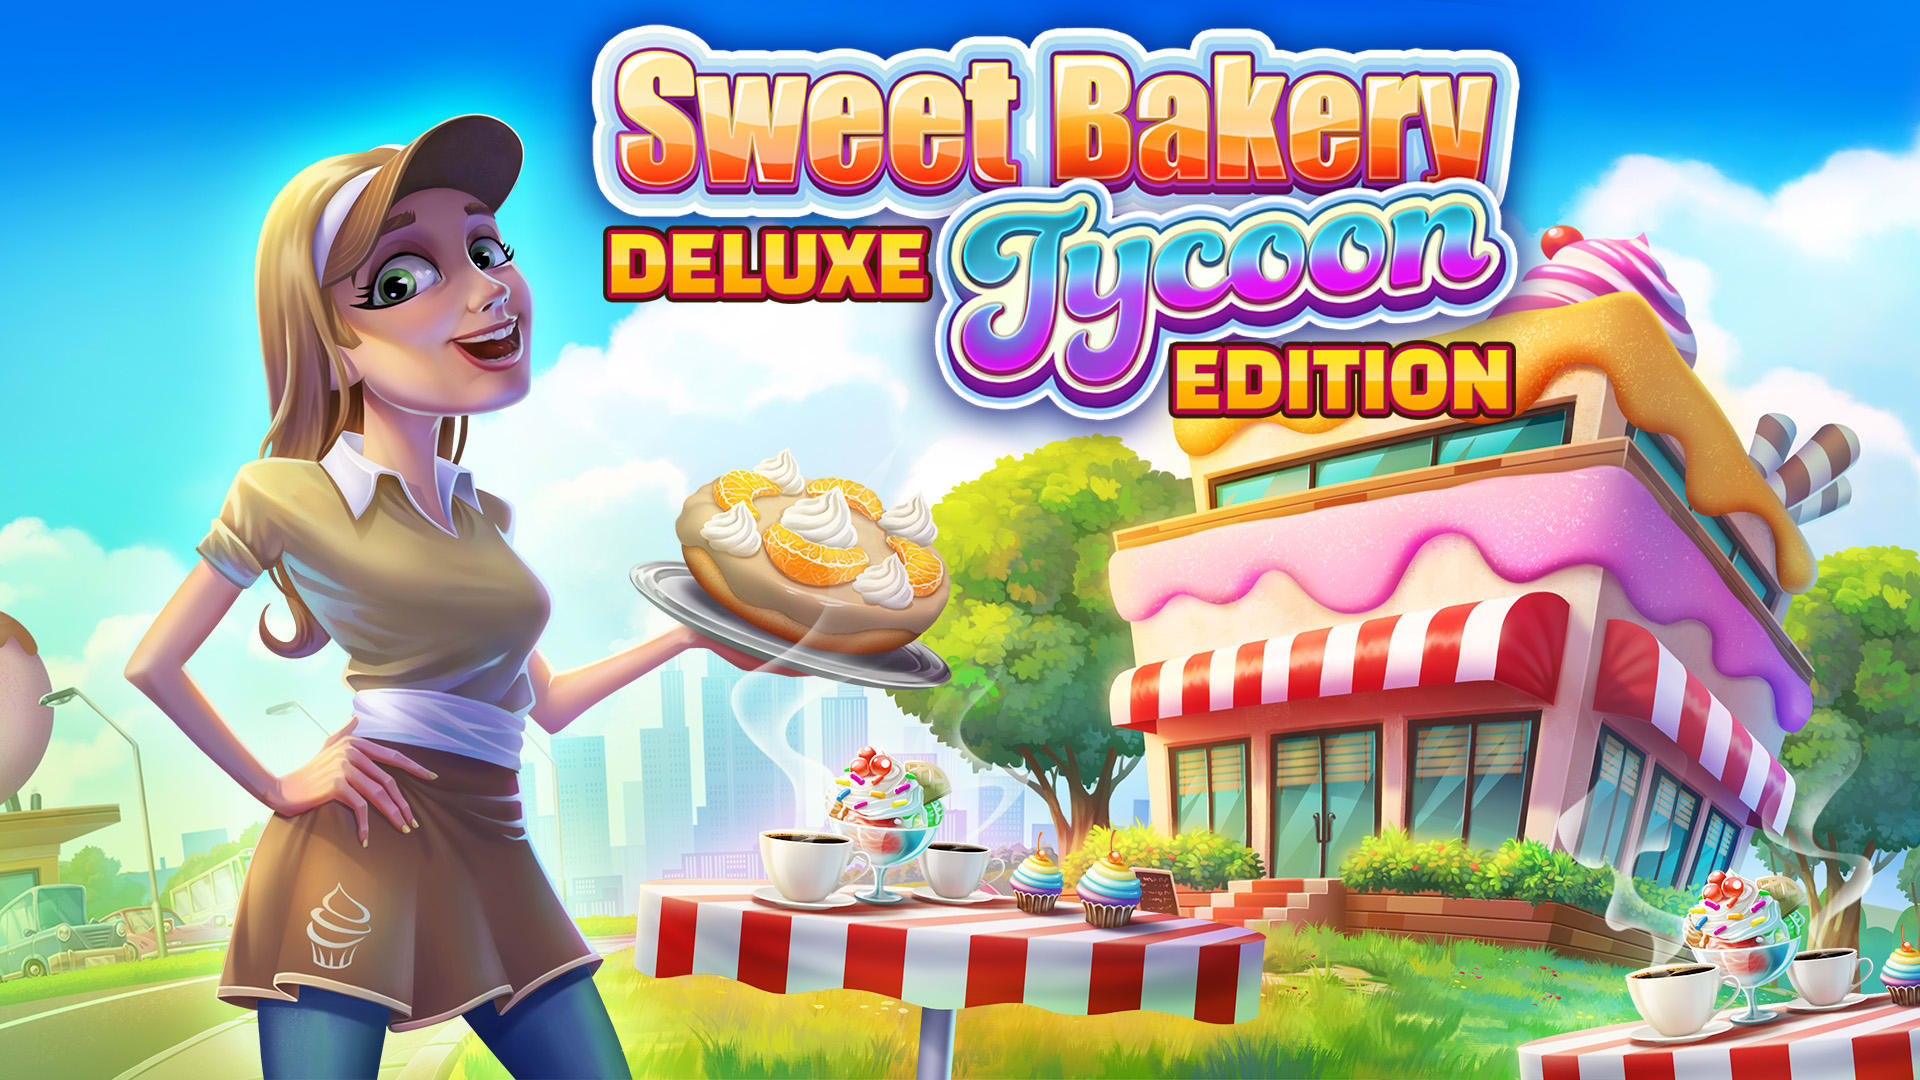 Sweet Bakery Tycoon Deluxe Edition